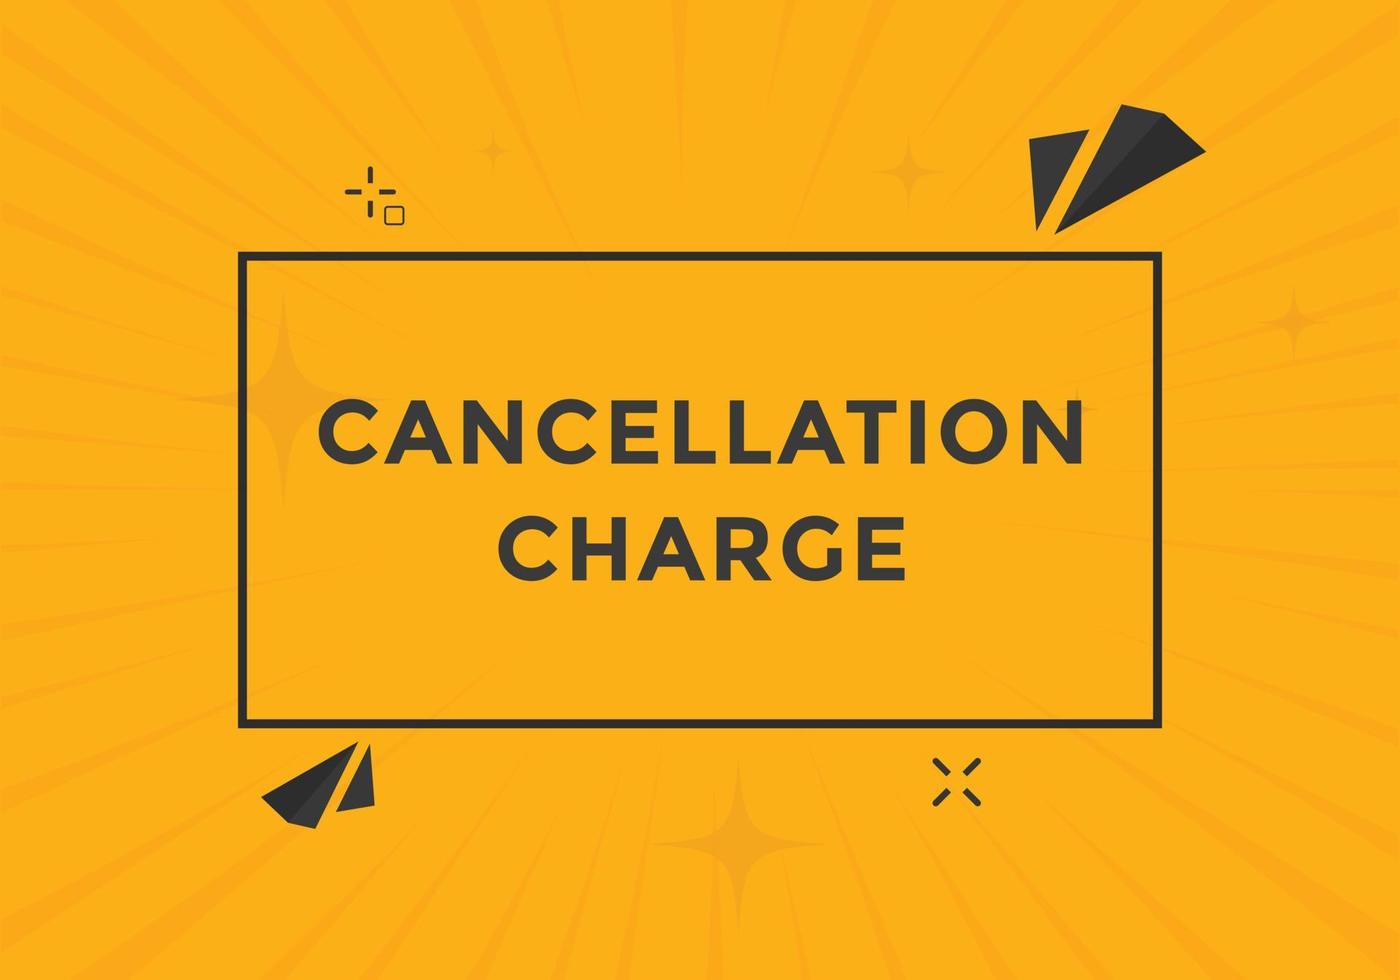 cancellation charge button. cancellation charge speech bubble. cancellation charge banner label template. Vector Illustration